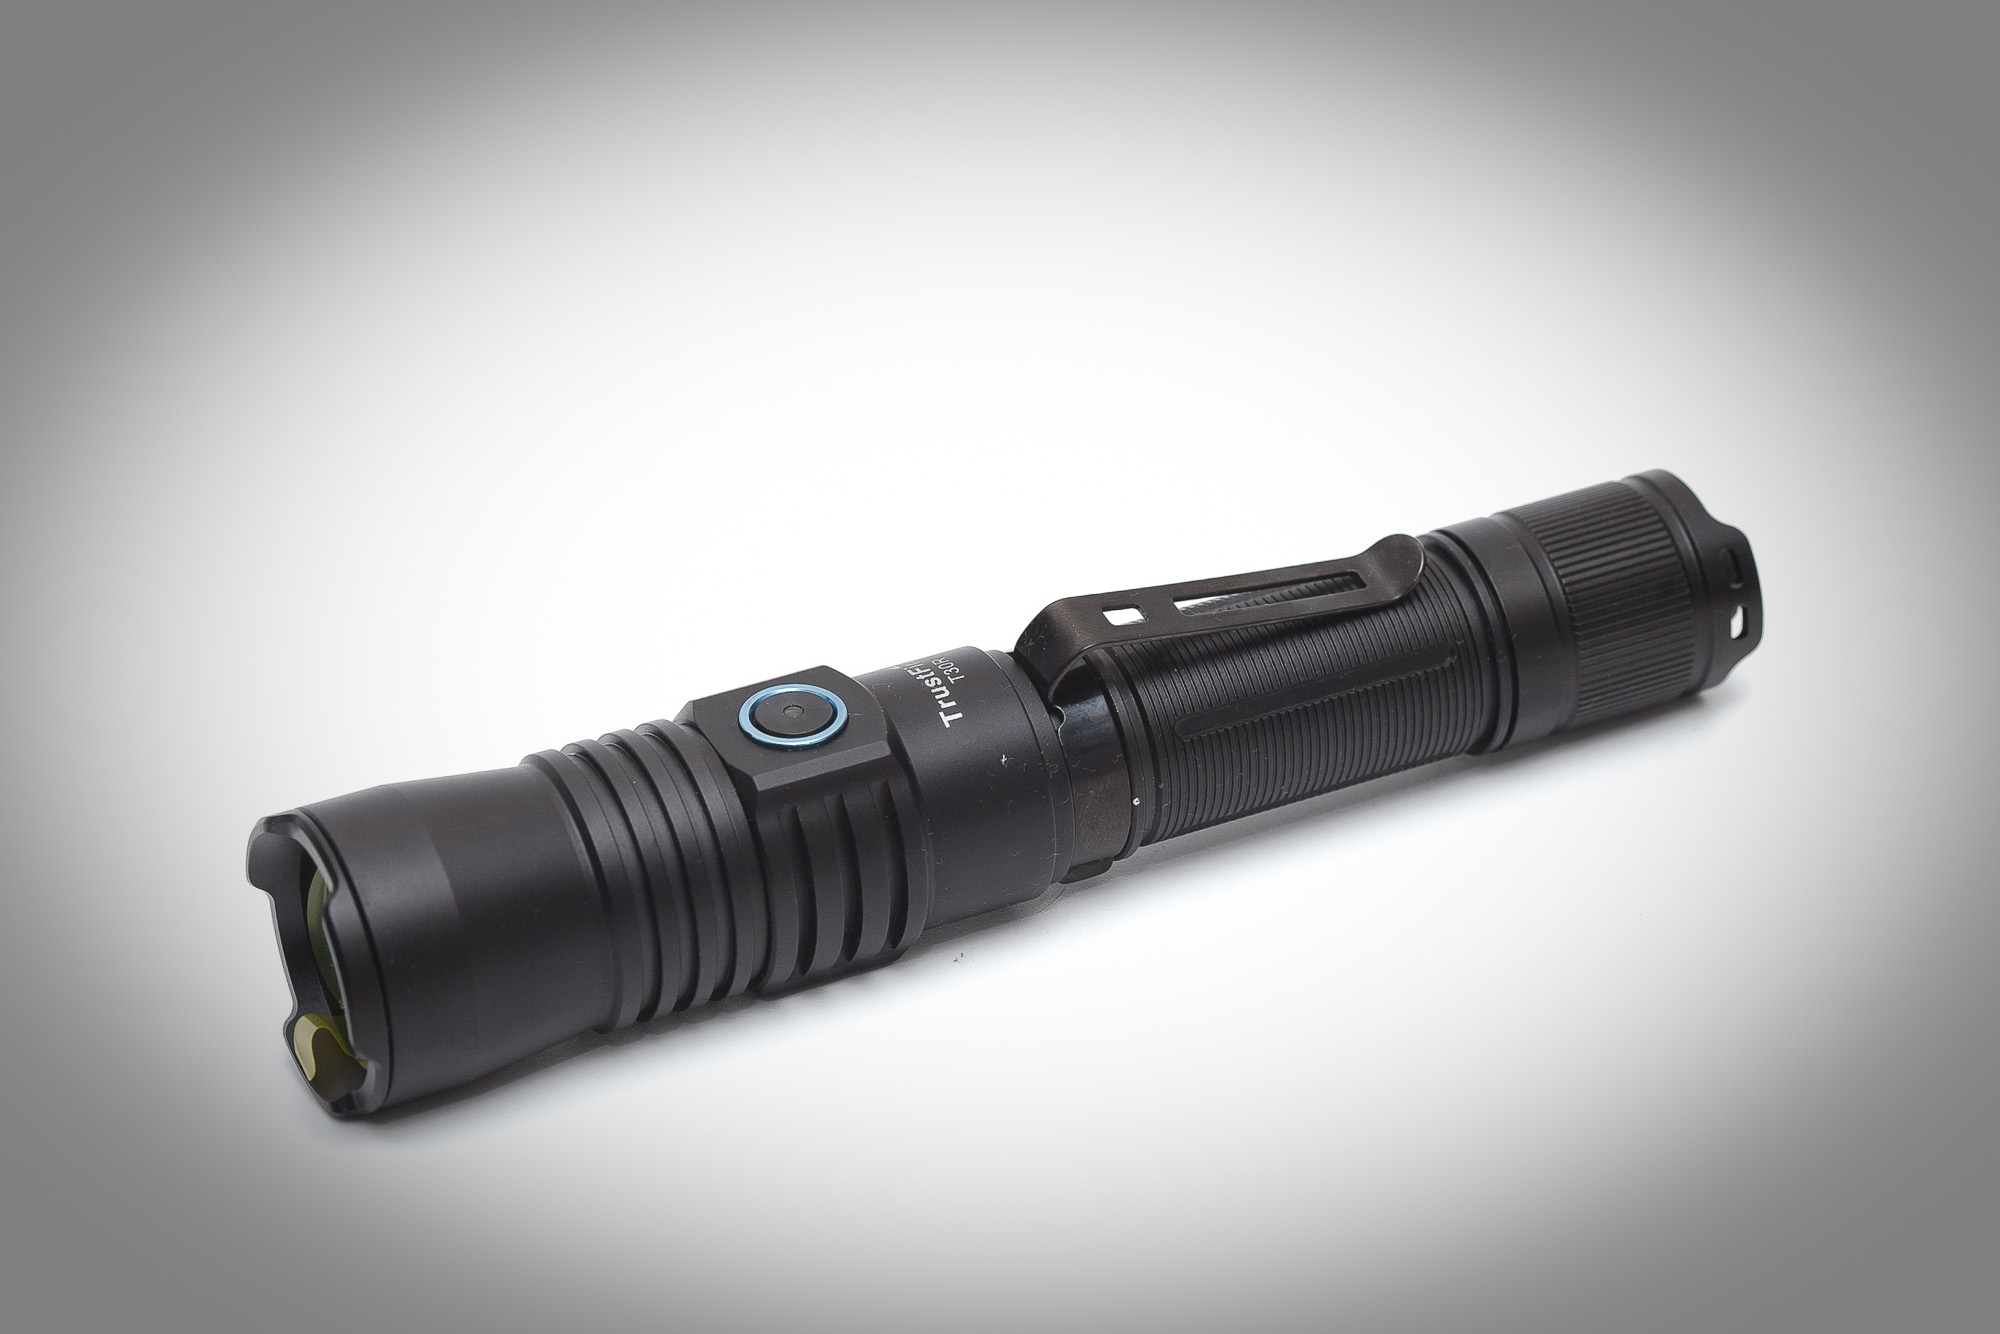 TrustFire T30R LEP flashlight with 1,100 meters beam and 460 lumens